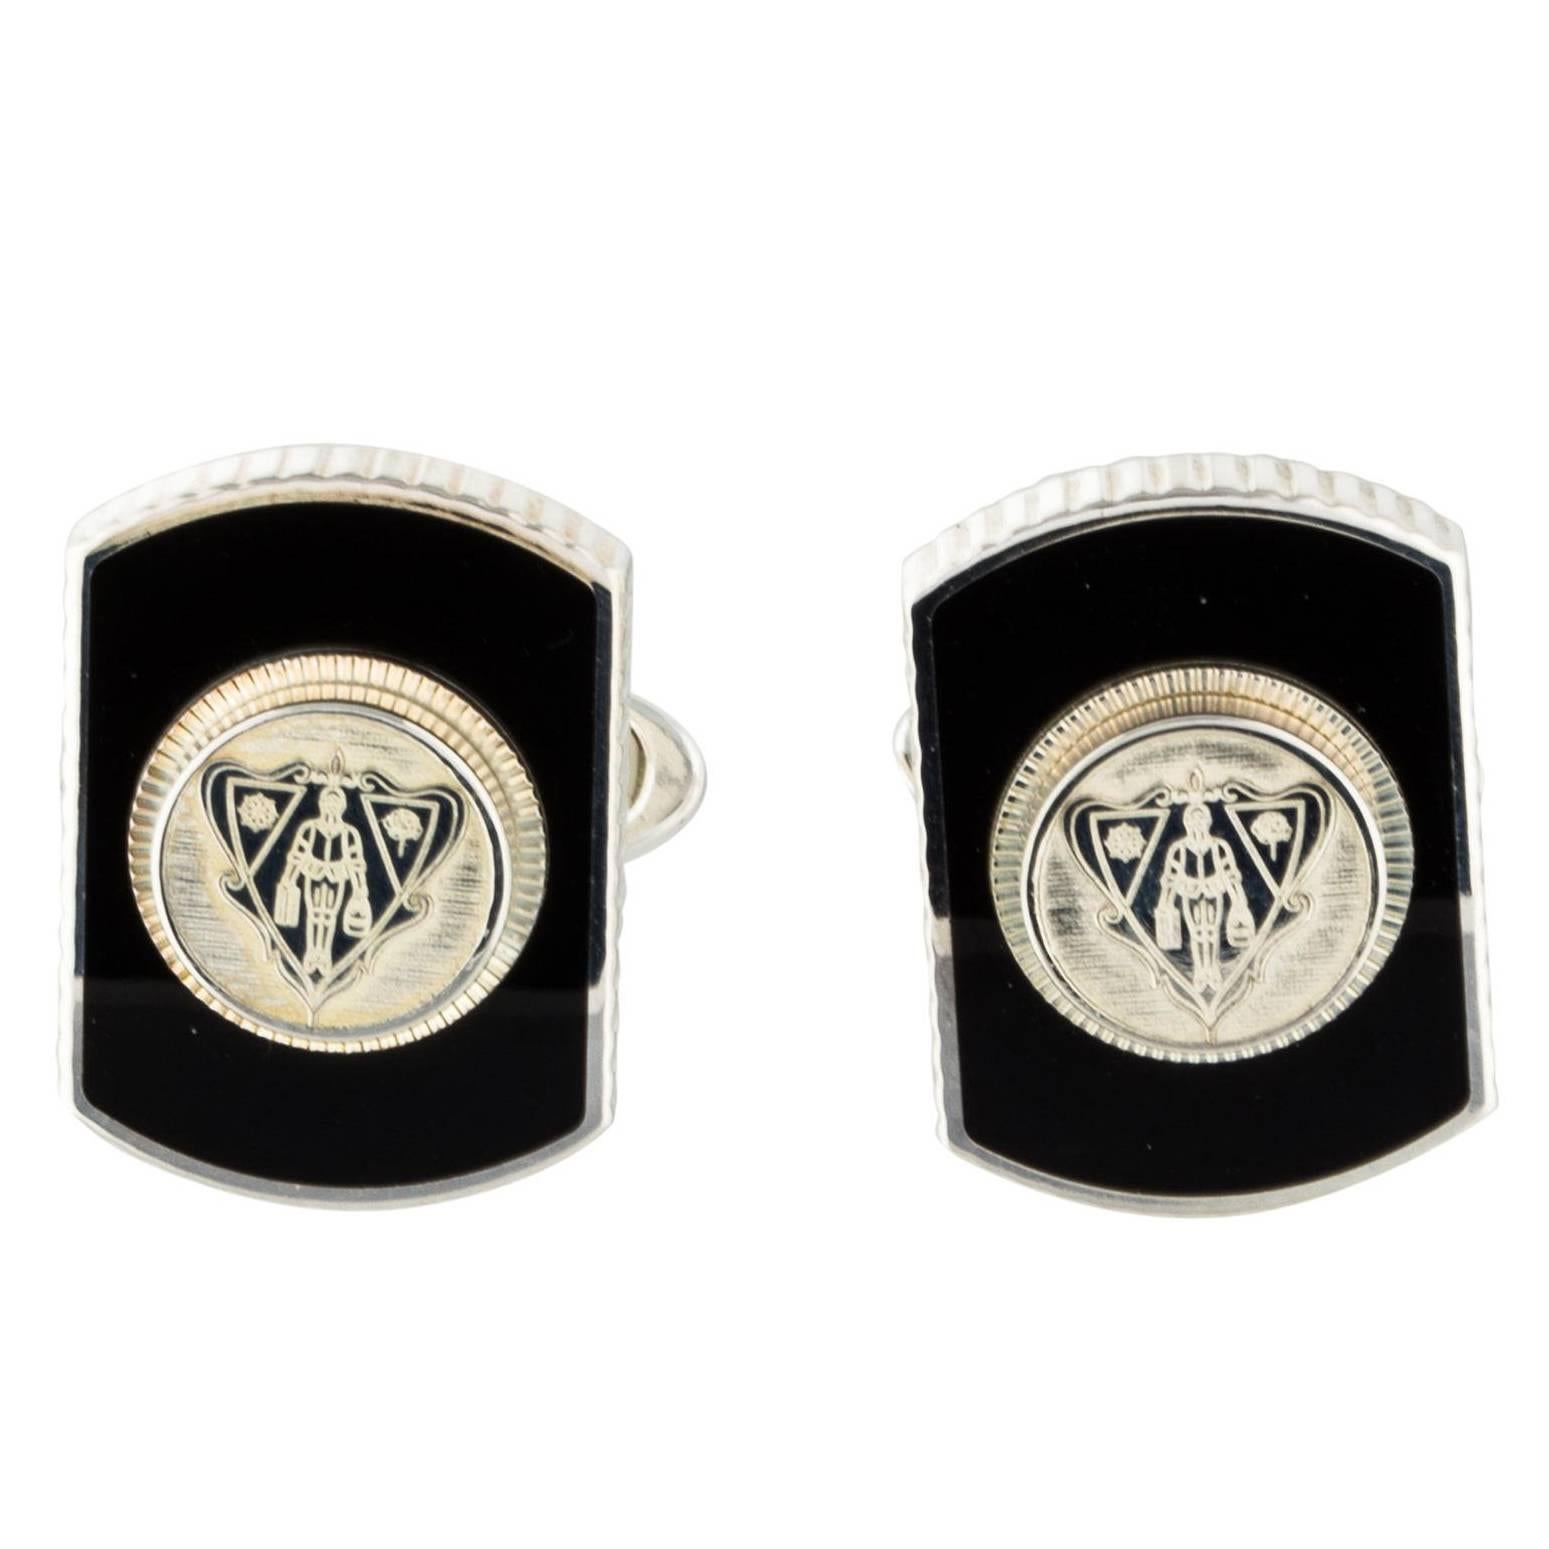 Gucci New Sterling Silver Black Hysteria Evening Suit Accessory Cufflinks in Box